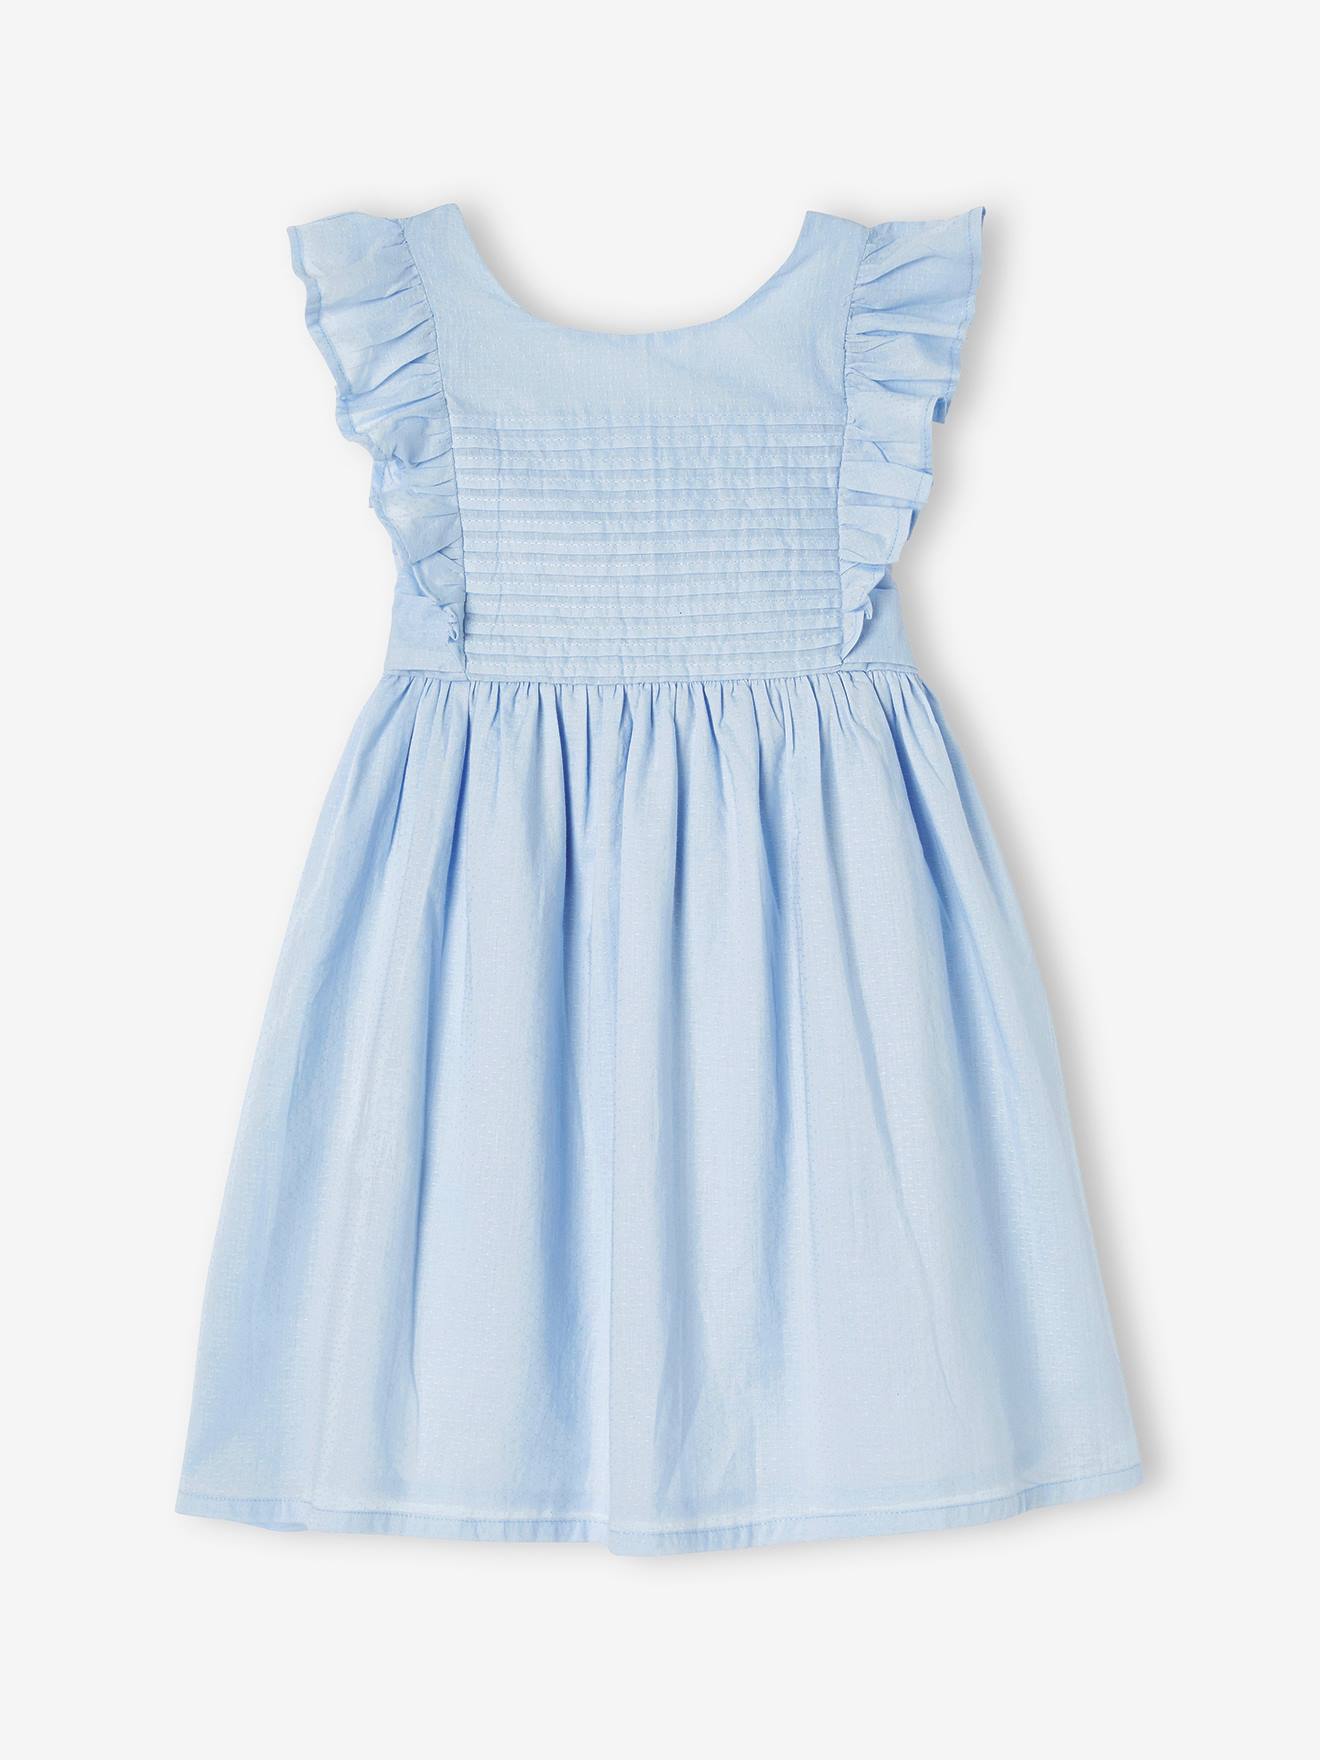 Occasion Wear Frilly Dress with Open Back for Girls sky blue